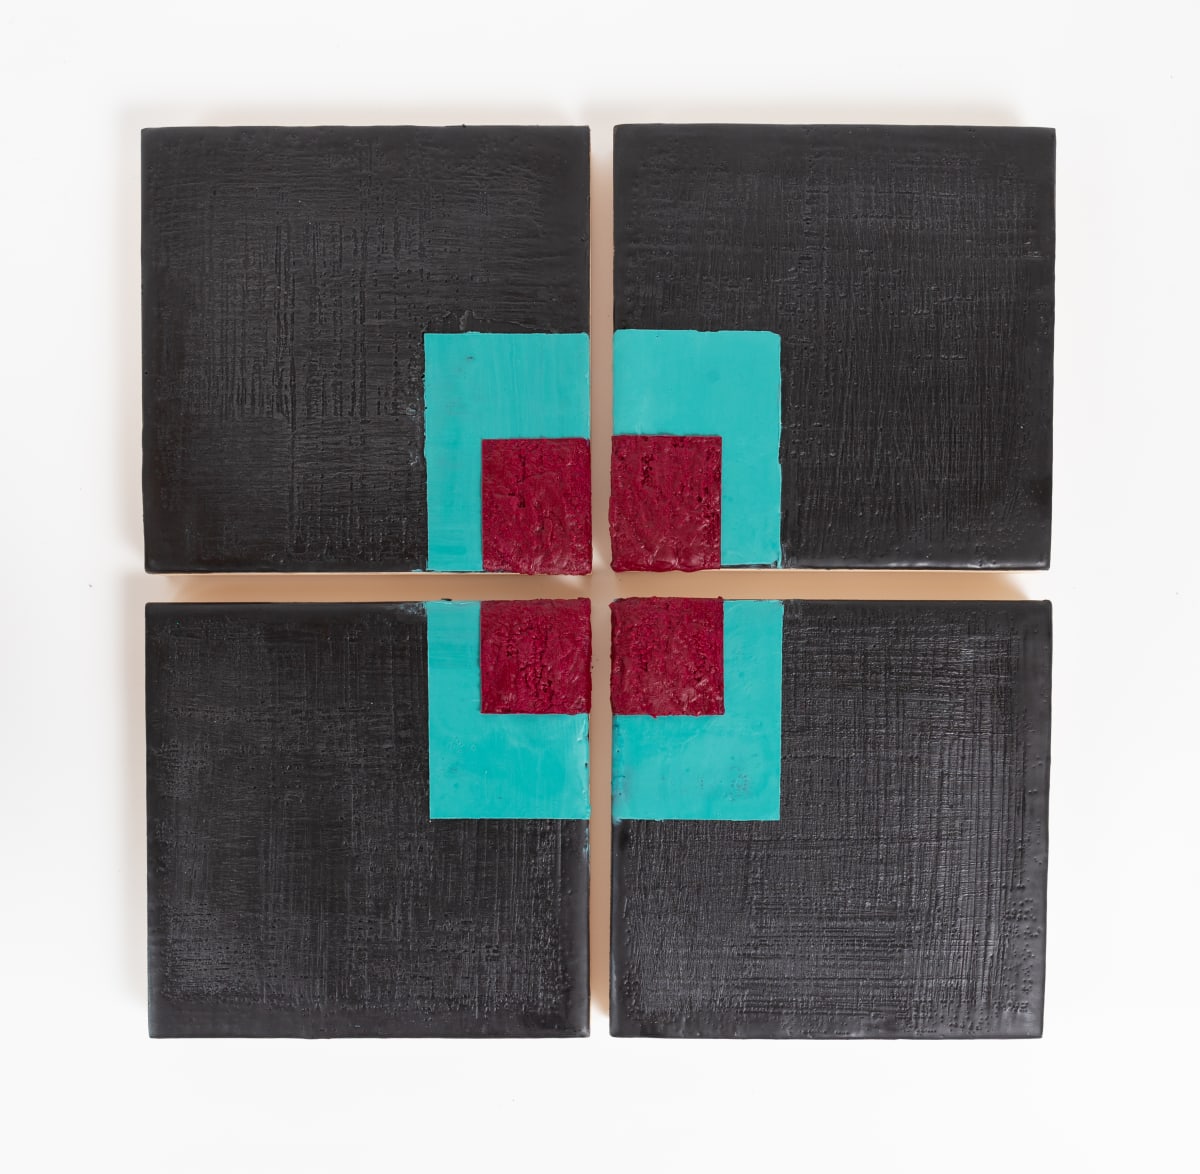 Connect Four by Scorpio Encaustics  Image: four different pieces of artwork each 6x6" and 3/4 "depth that can be hung as a grouping. 